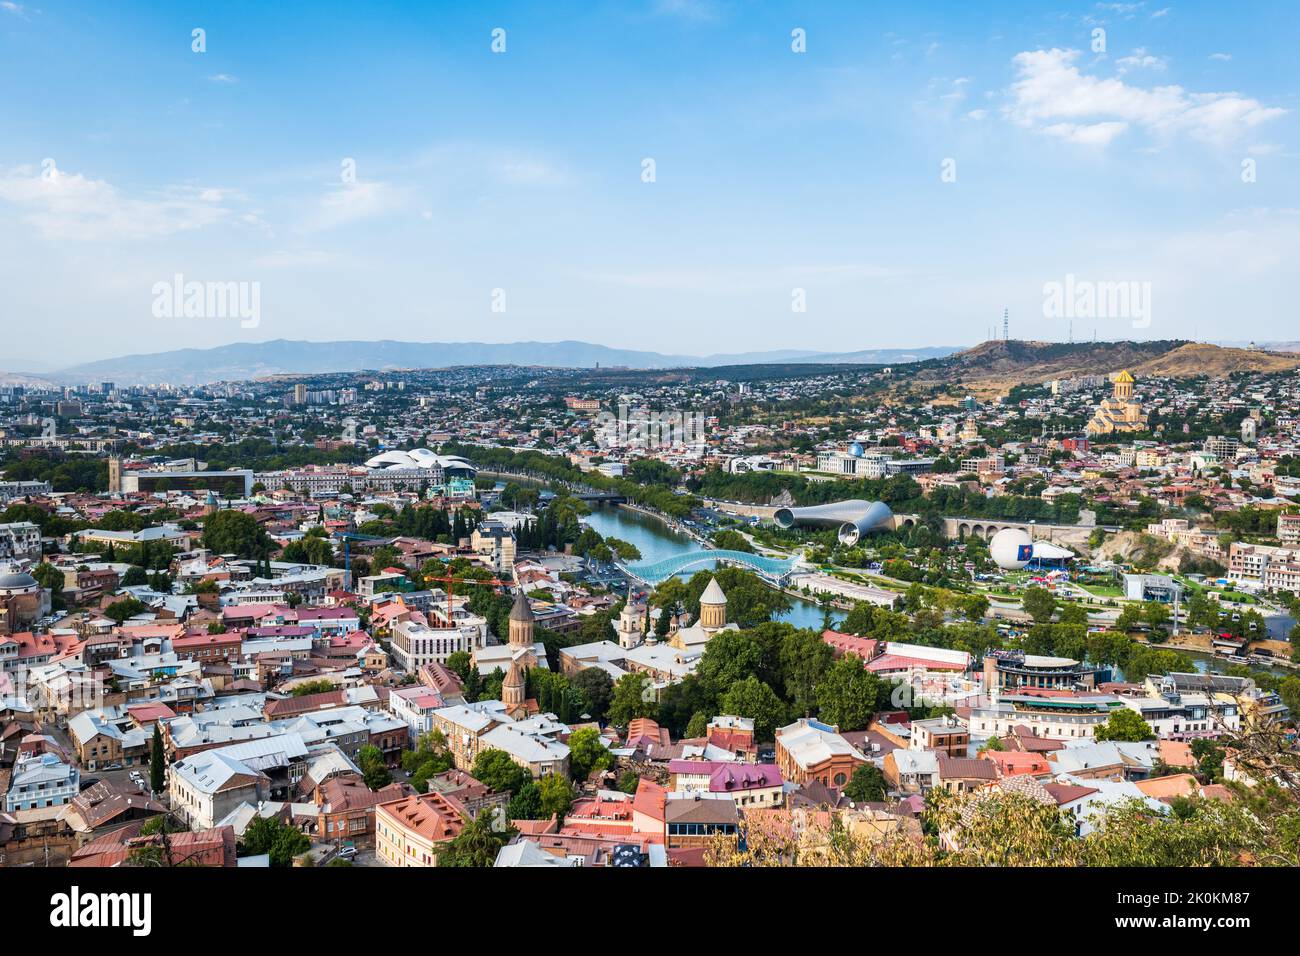 Tbilisi cityscape in summer, Georgia. Top view over the city center and Kura river in Tbilisi. Aerial view of the Georgian capital Stock Photo